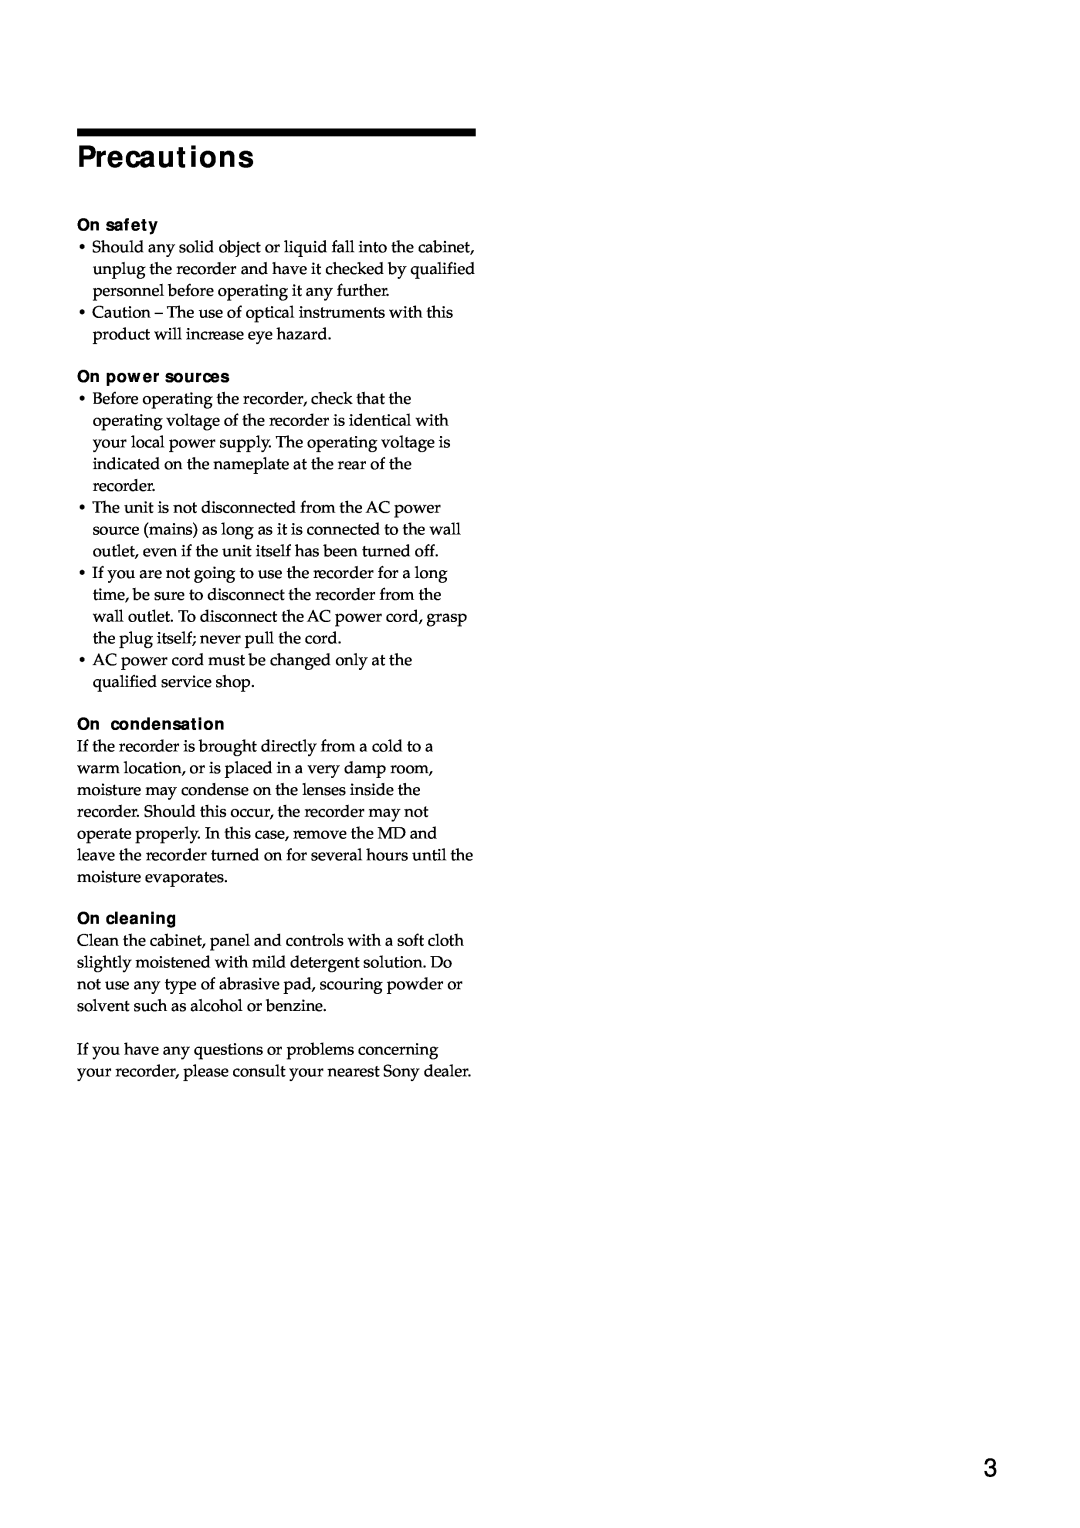 Sony MDS-E10 manual Precautions, On safety, On power sources, On condensation, On cleaning 